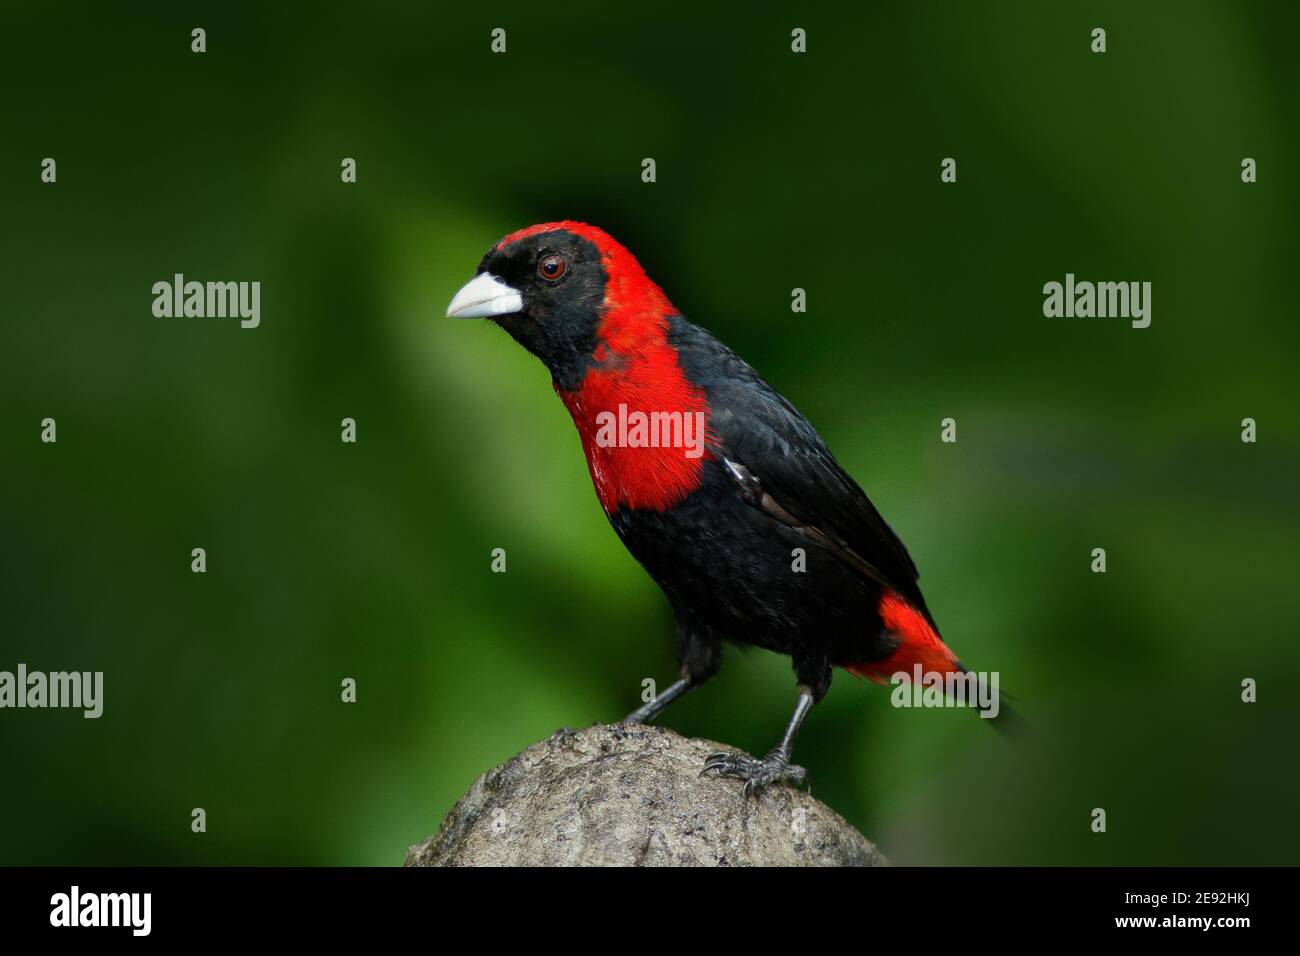 Crimson-collared Tanager, Ramphocelus sanguinolentus, exotic tropical red and black songbird from Costa Rica, in the green forest nature habitat. Stock Photo